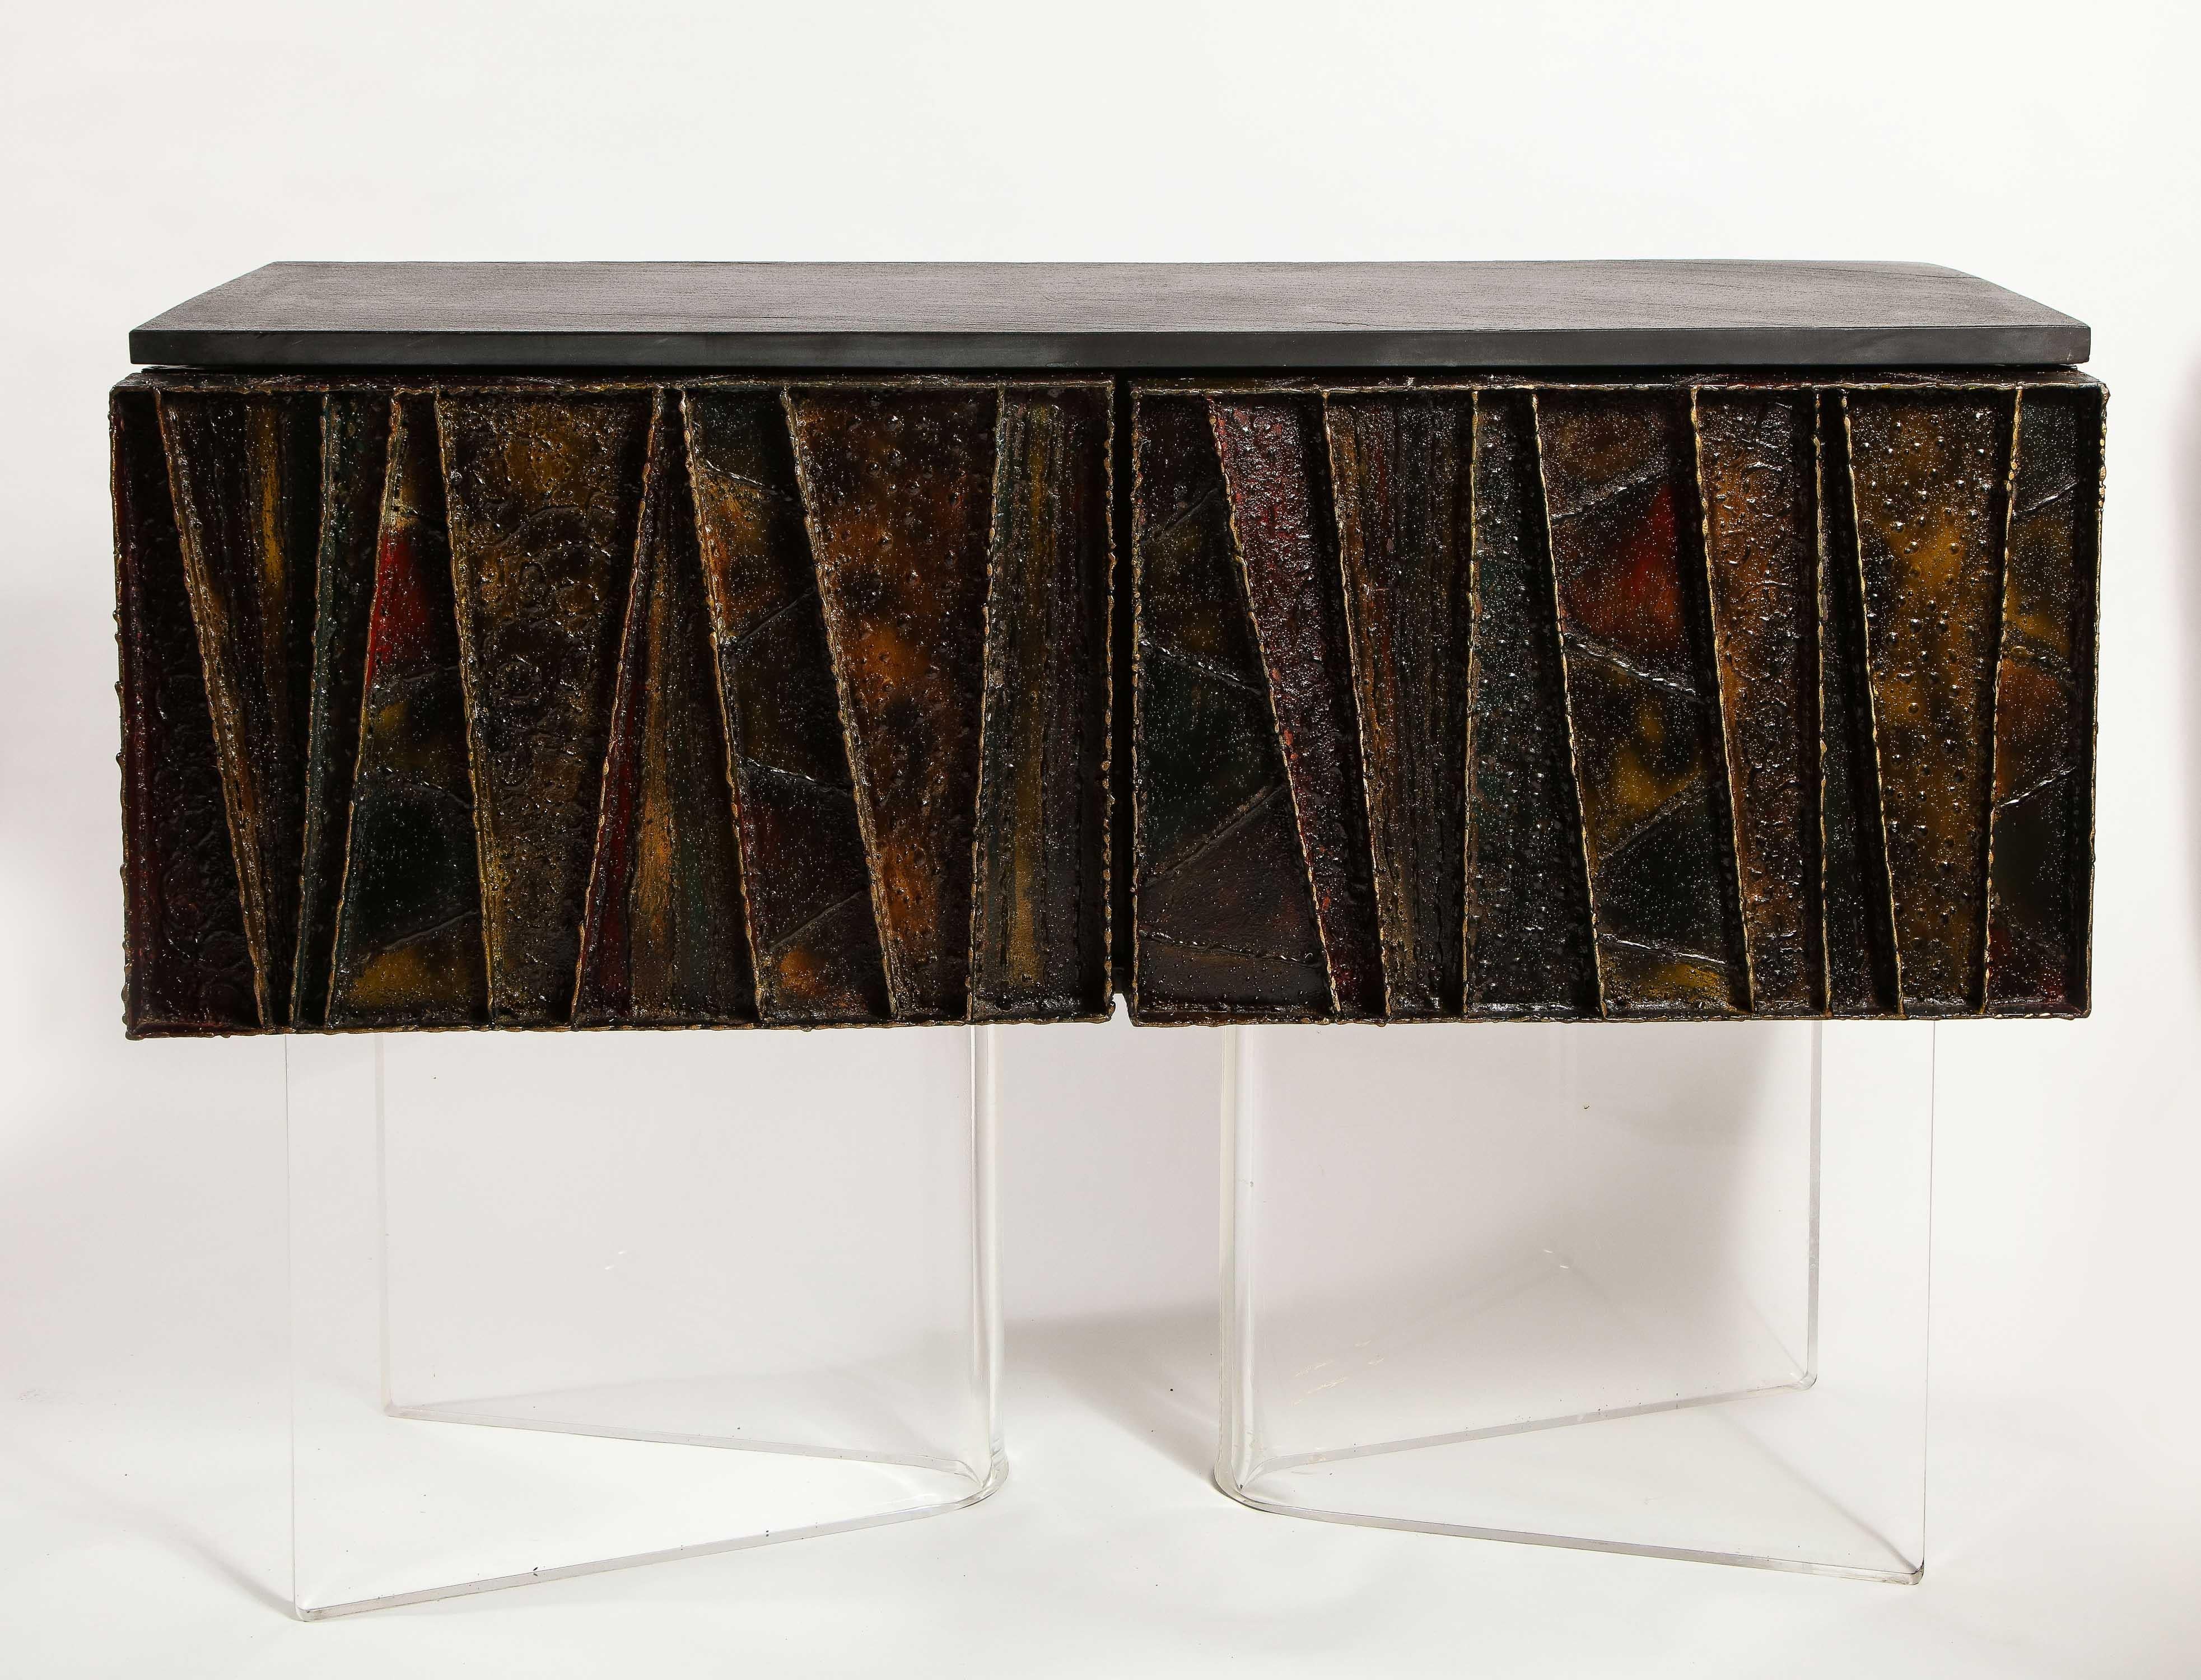 An exceptional Paul Evans signed and dated 1972 handcrafted “Deep Relief” Brutalist sideboard/cabinet made of brushed polychrome steel, slate, and wood. This a truly unique and modern angular form piece of furniture. Paul Evans is well known for his